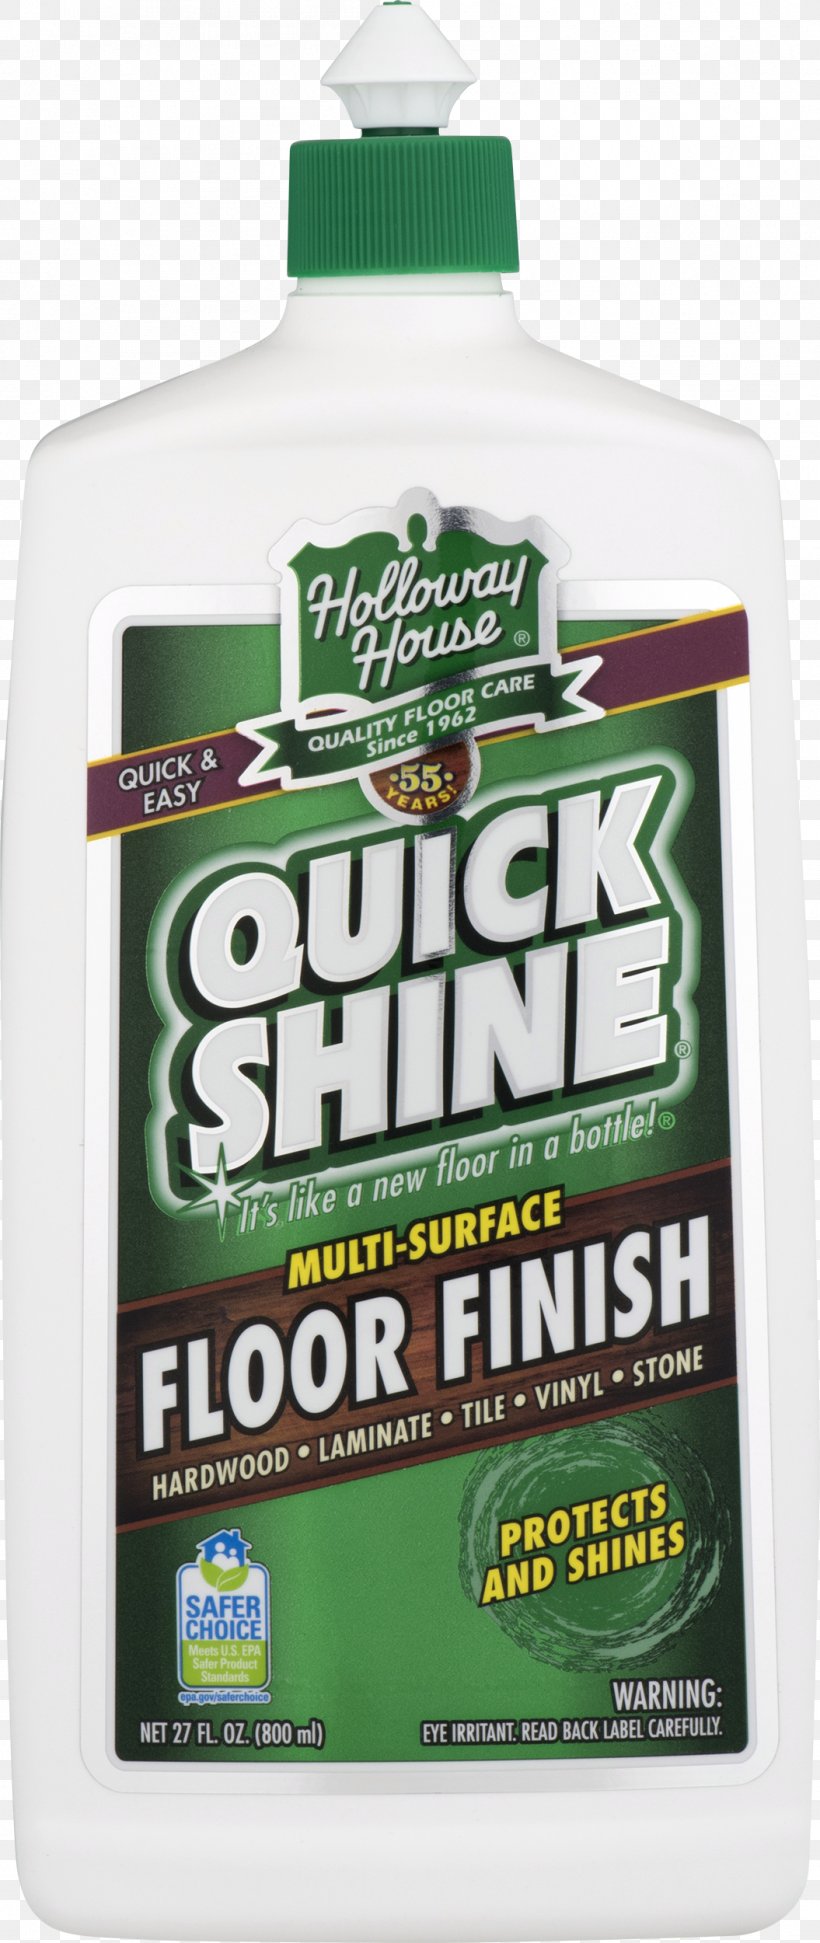 Quick Shine Concentrated Floor Cleaner Quick Shine Floor Finish 1890ml Holloway House Quick Shine 27-Ounce Floor Finish Bottle, 6-Pack By Holloway House Car Wood Glue, PNG, 1055x2500px, Car, Adhesive, Automotive Fluid, Bottle, Floor Download Free